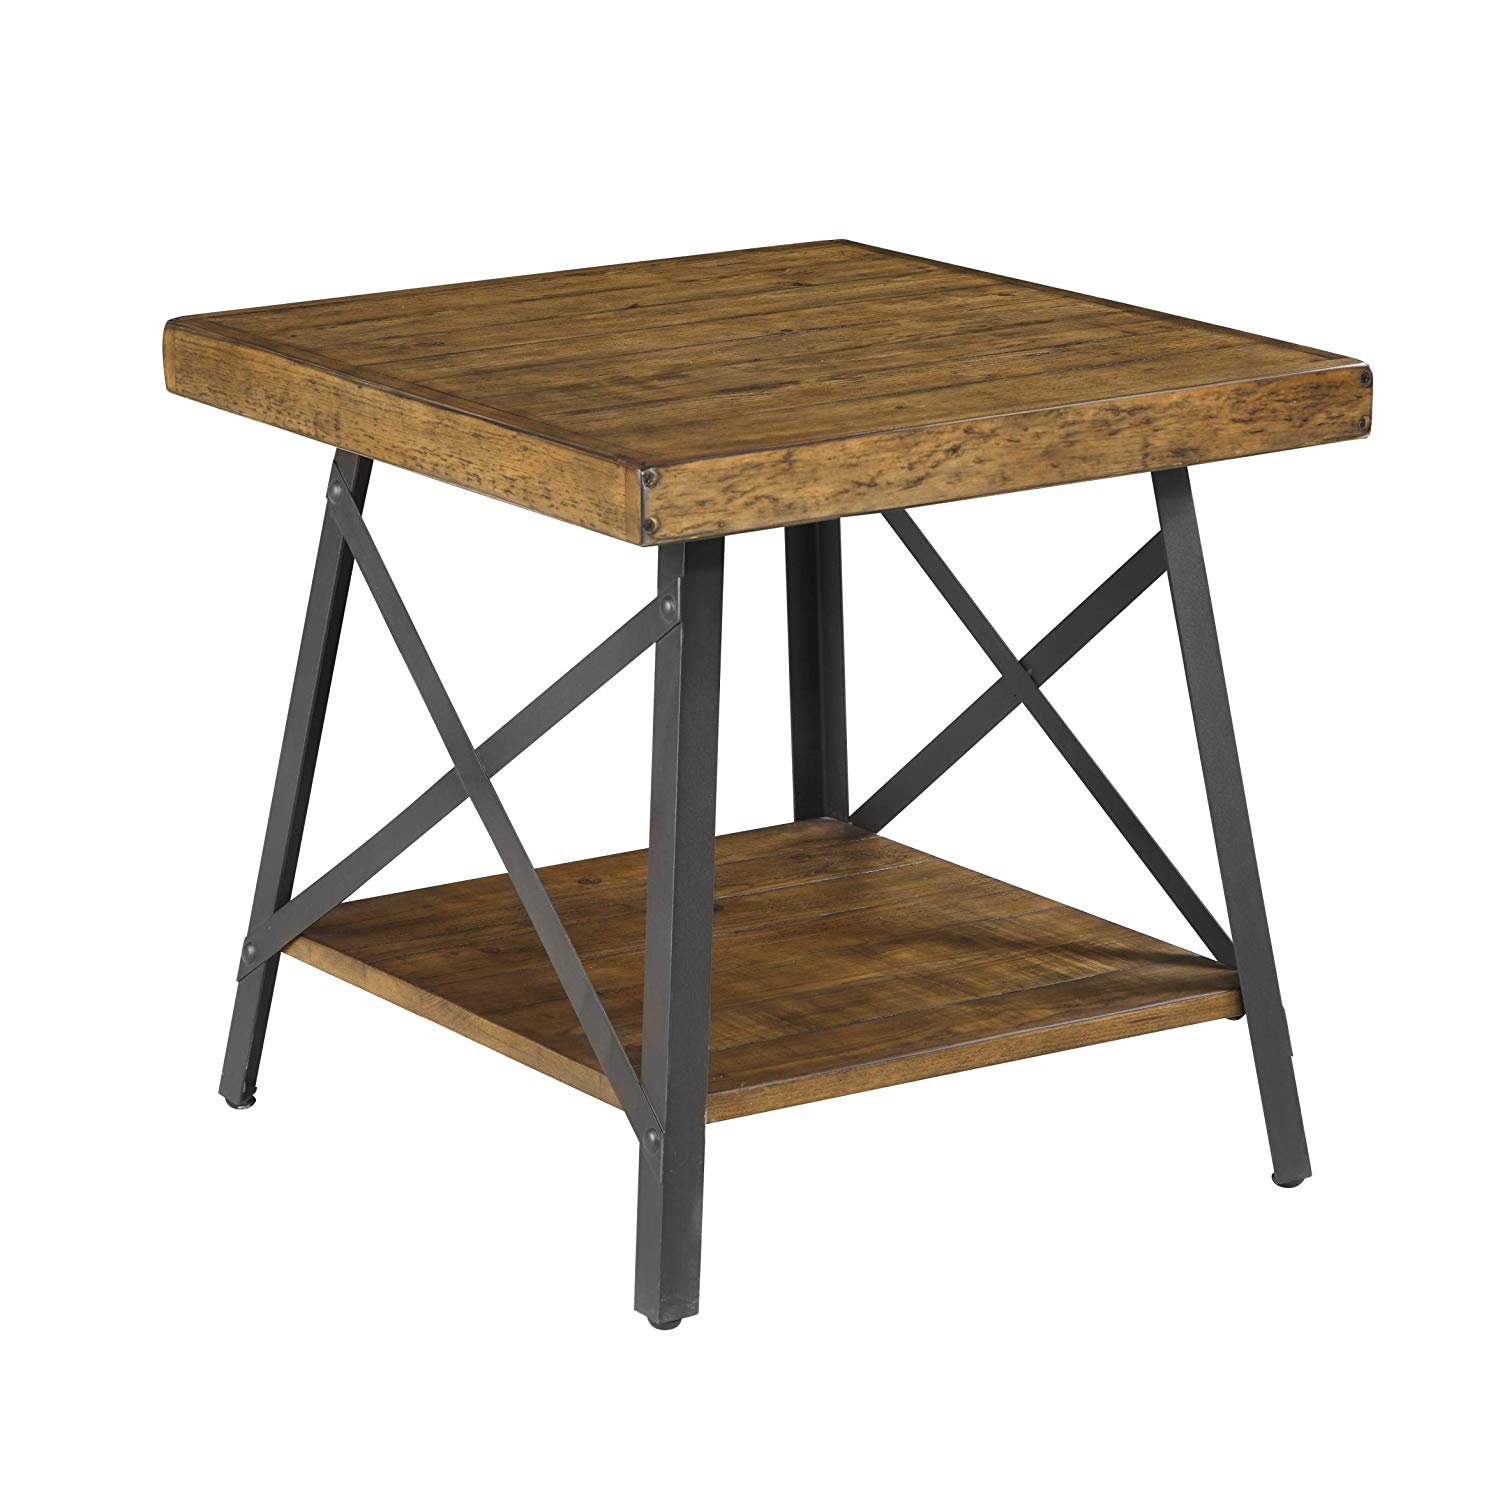 emerald home chandler rustic wood end table with solid top metal base and open storage shelf accent kitchen dining green tablecloth tables ikea white coffee skinny sofa beachy